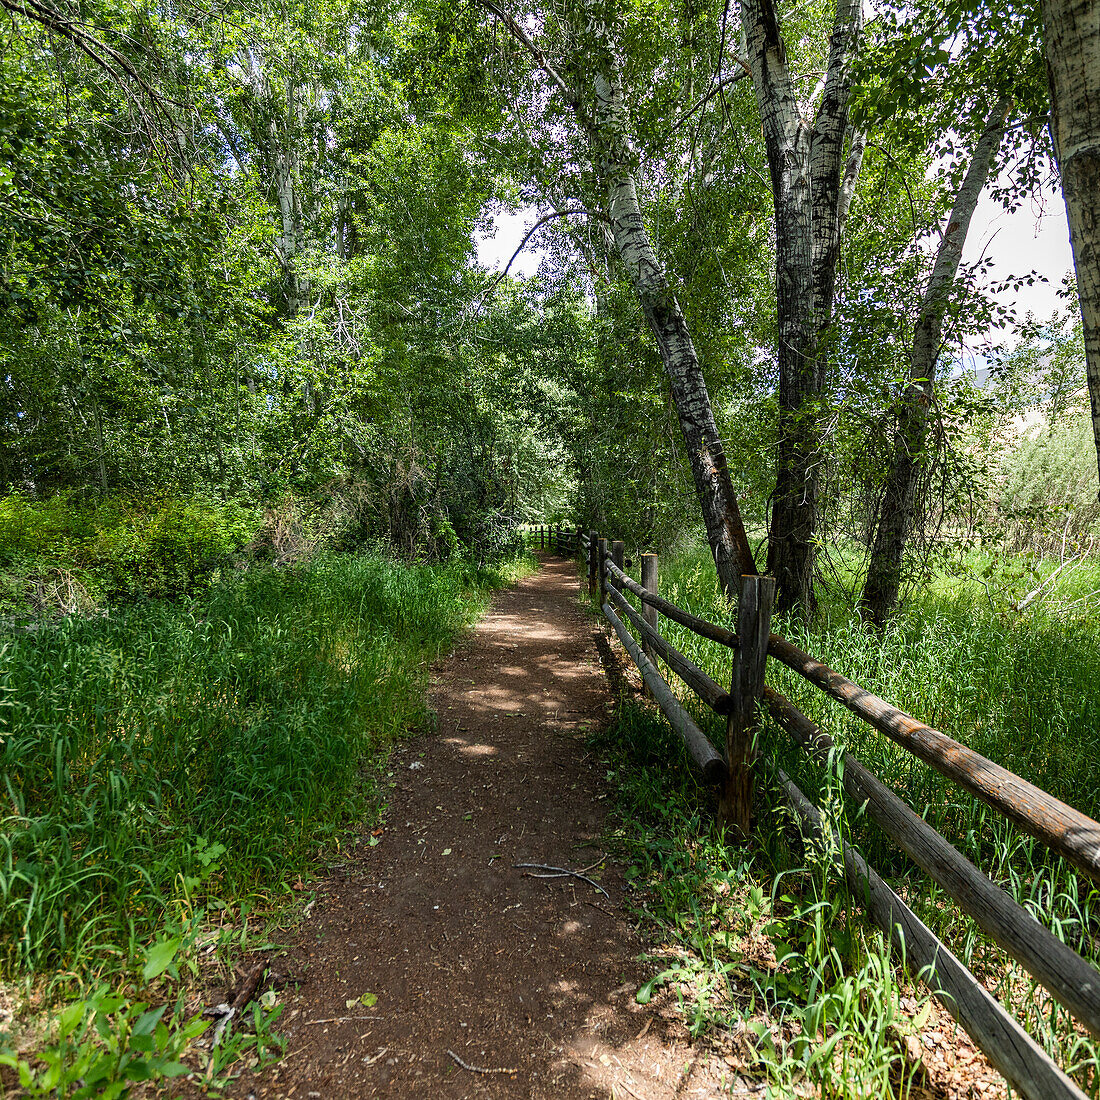 USA, Idaho, Bellevue, Footpath and wooden fence in rural area